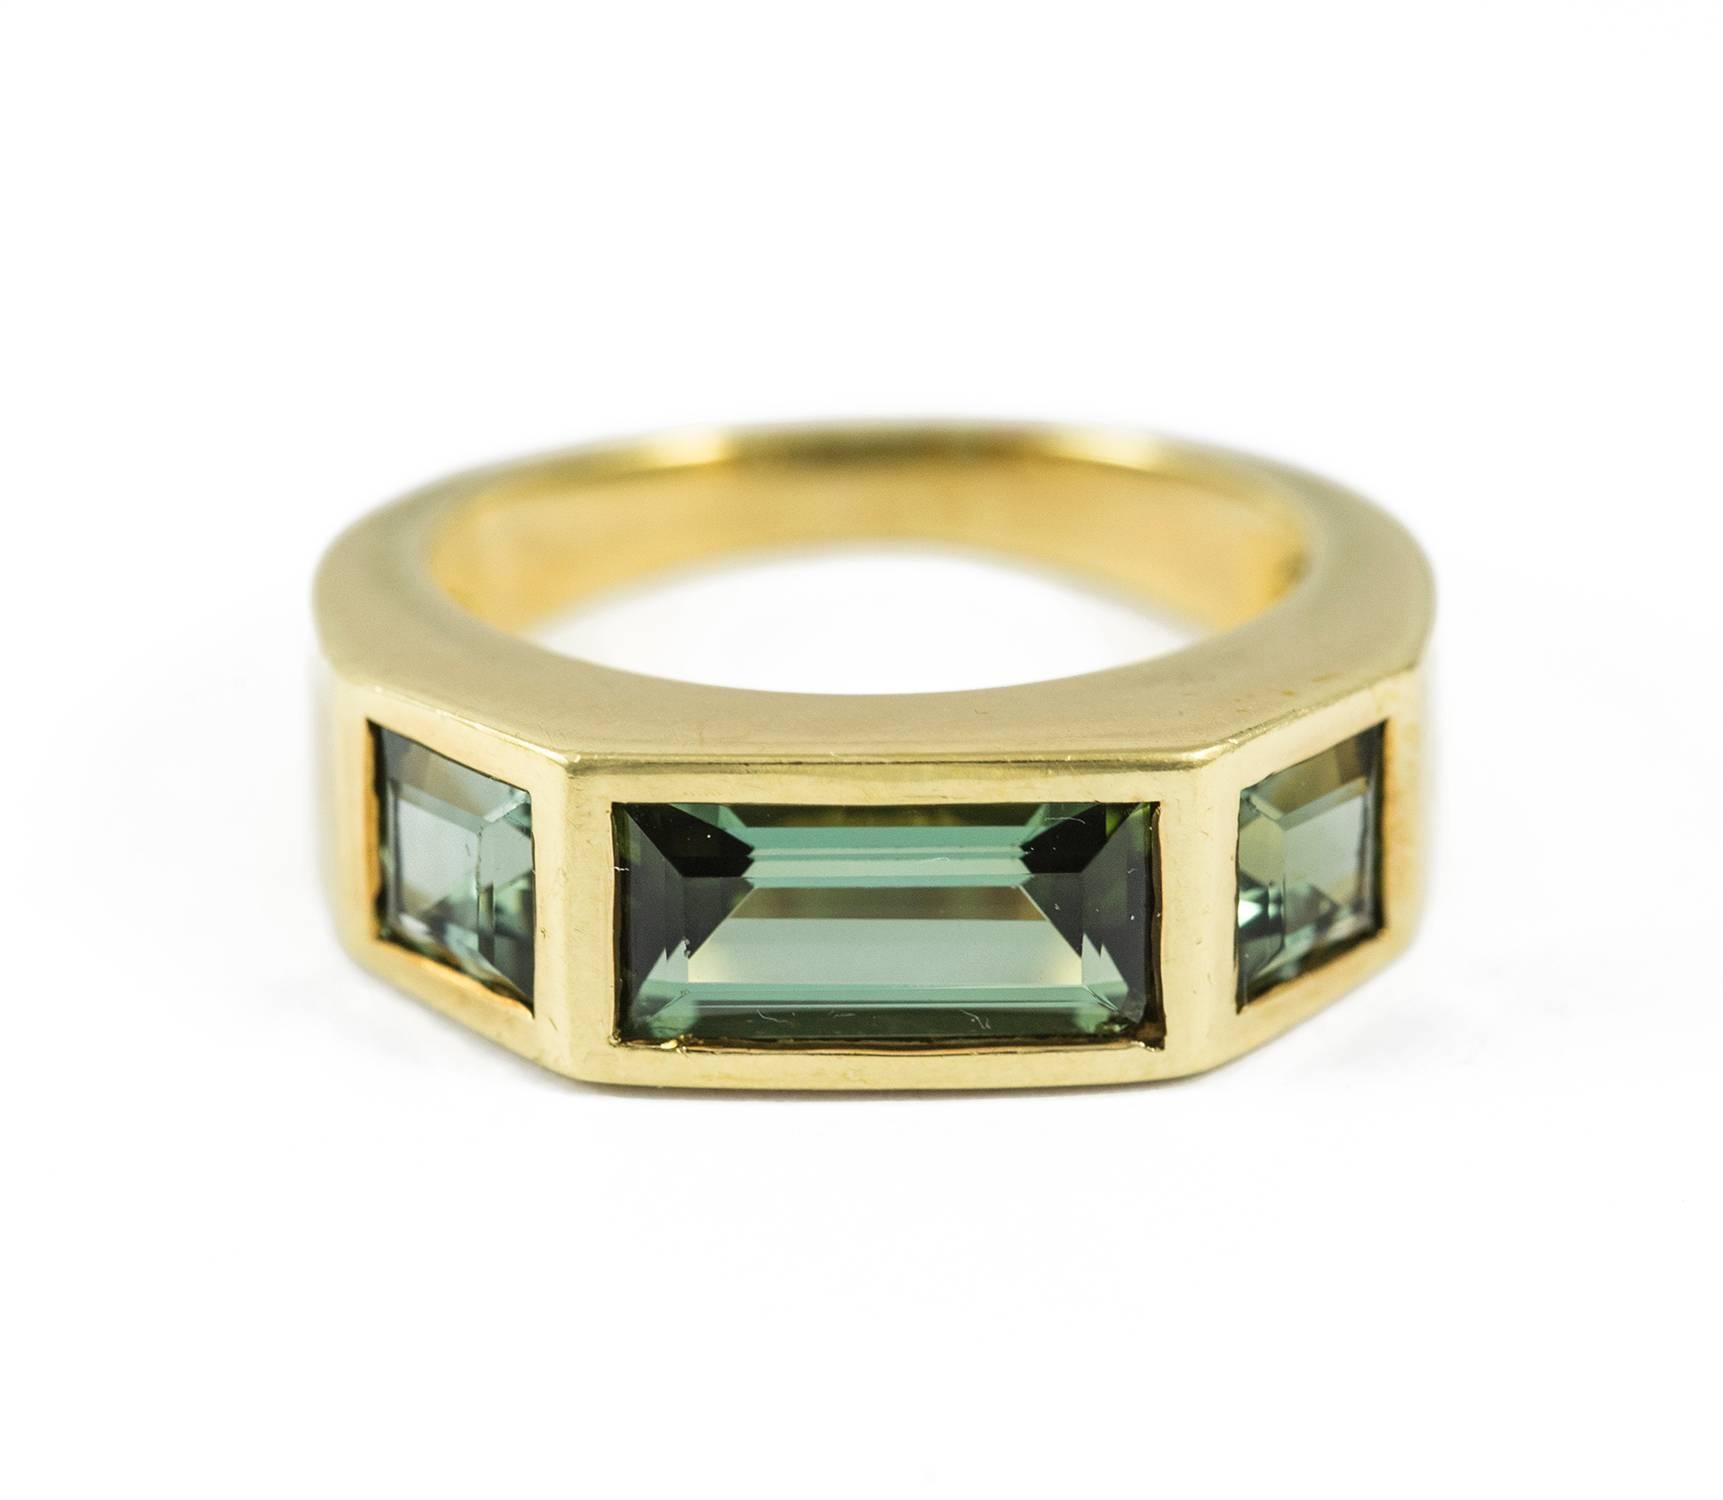 A green tourmaline and 18k yellow gold ring by Paloma Picasso for Tiffany & Co. The total weight of the vivid, strong colored and lush tourmaline's is 2.90 ct. 
Elegant and tailored this ring measures size 6 and is in excellent condition.